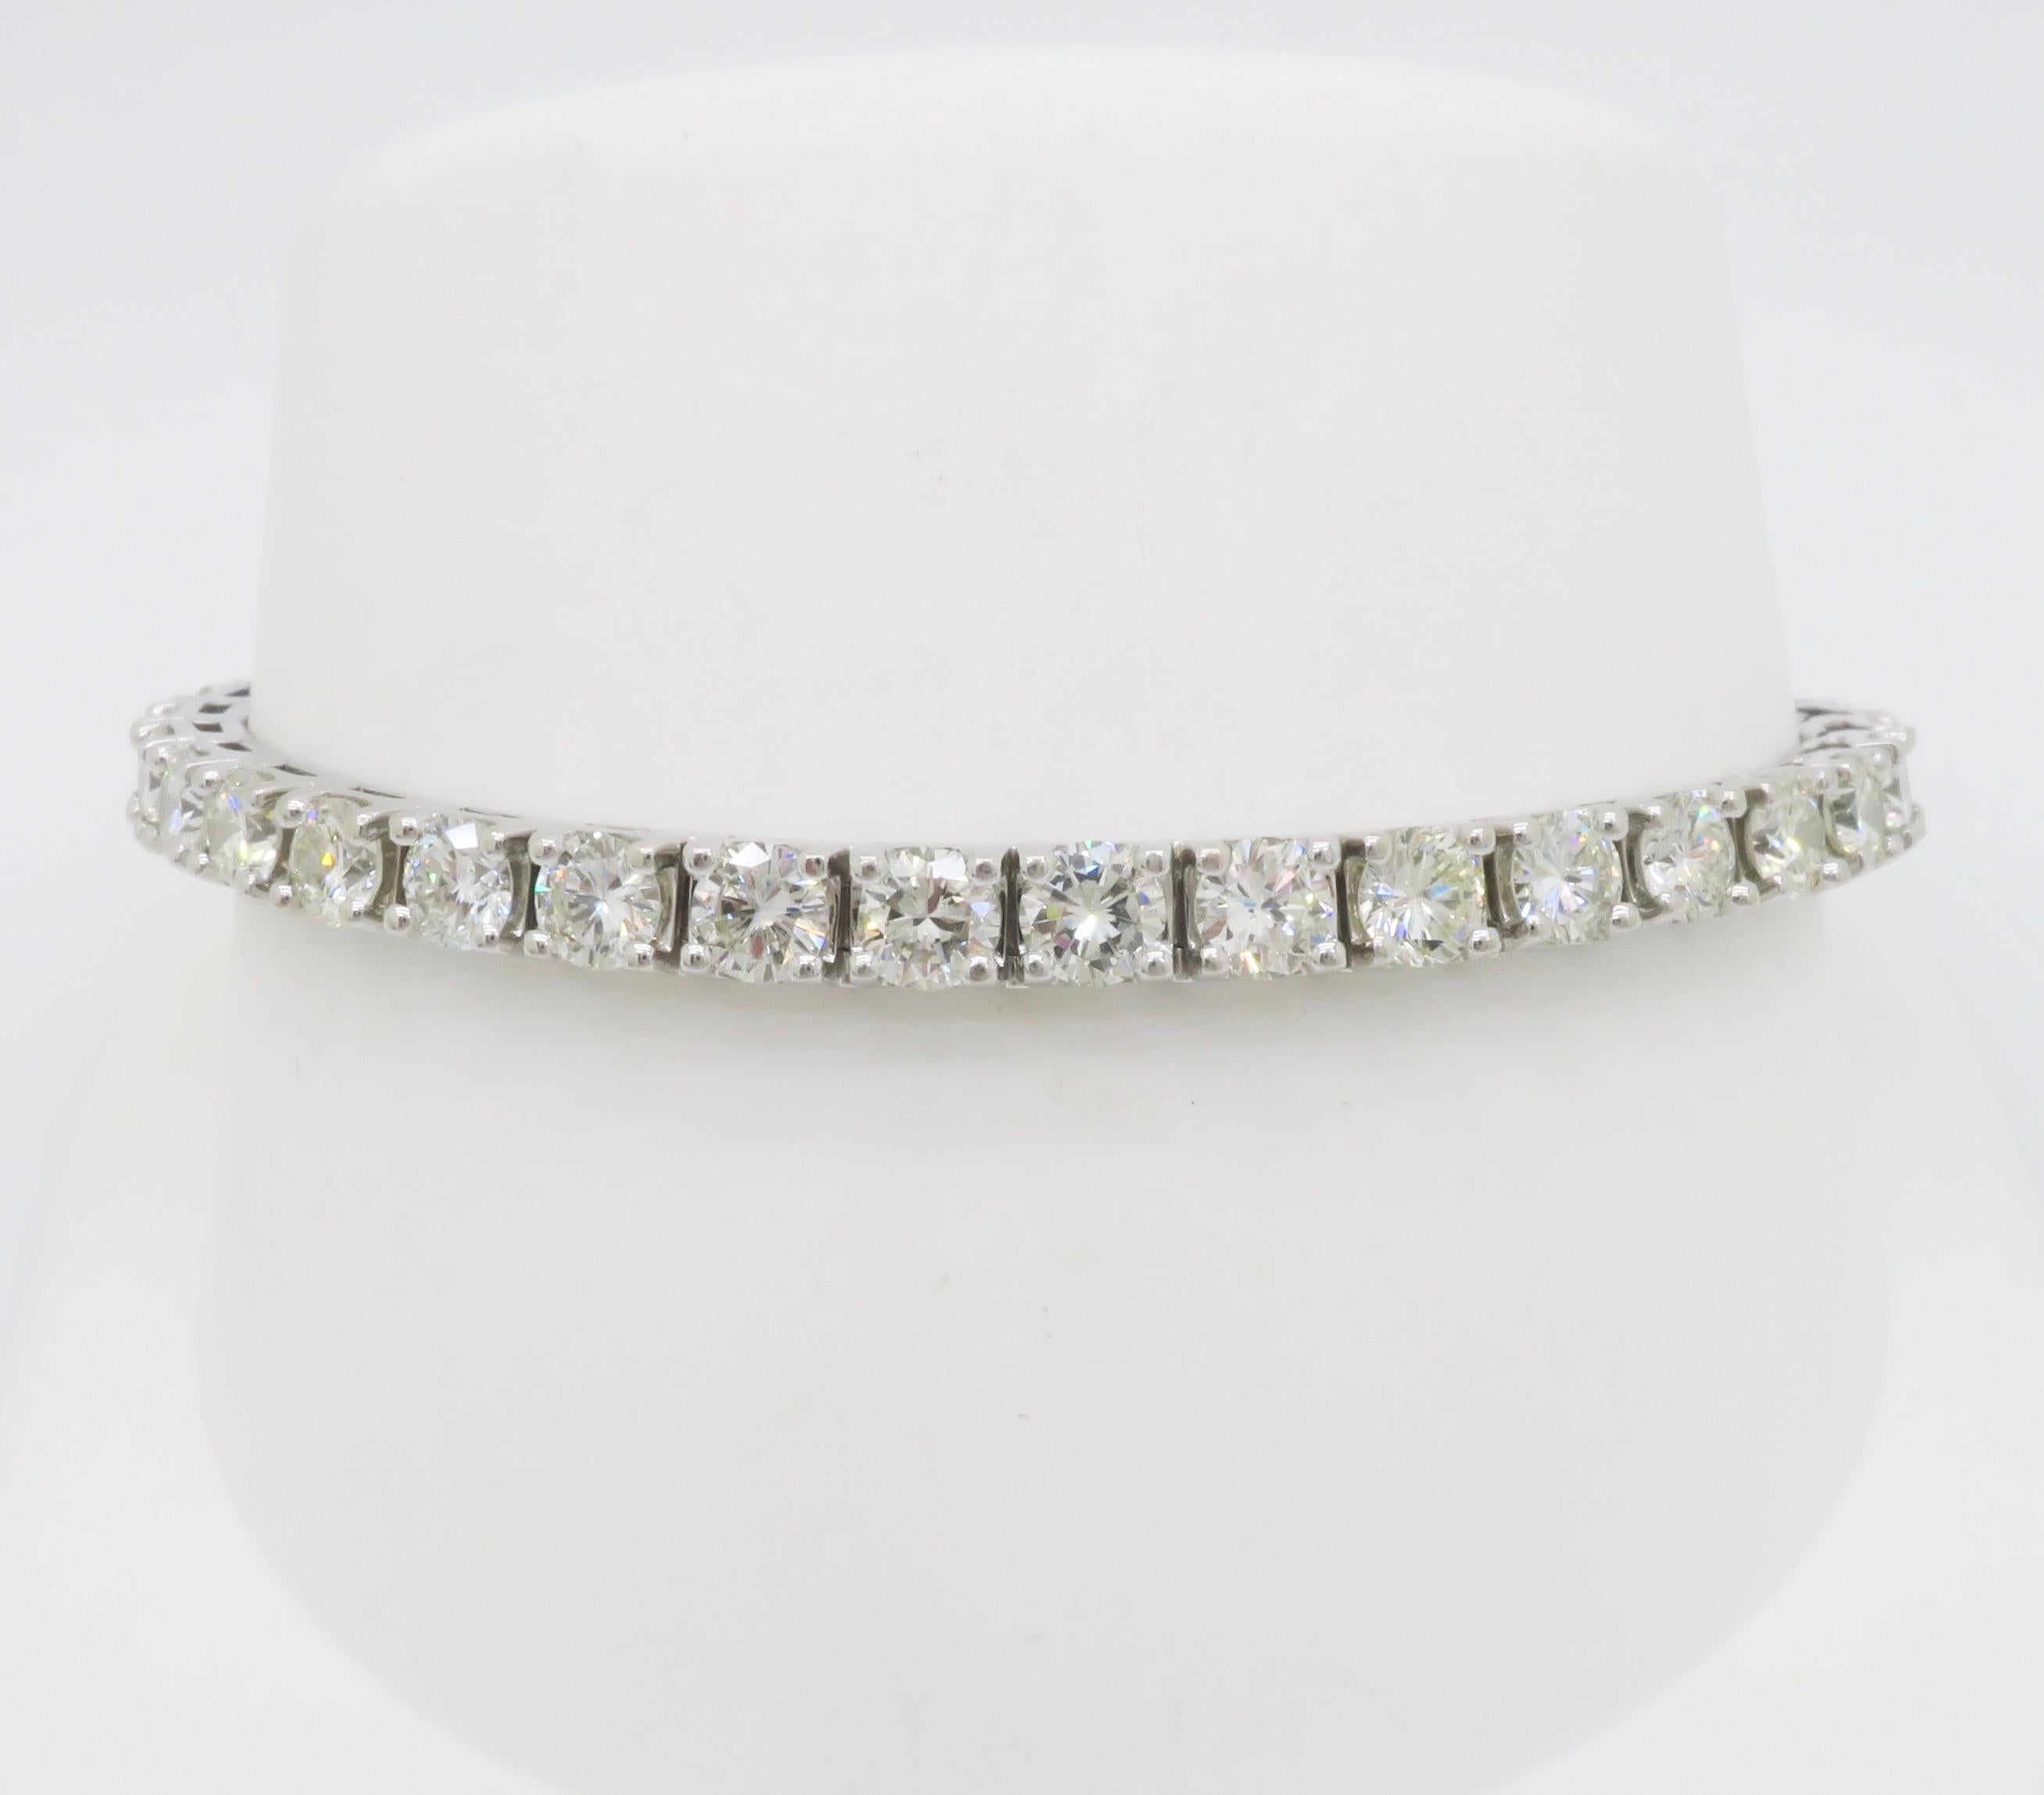 10.15CTW Round Brilliant Cut Diamond Tennis Bracelet  In Excellent Condition For Sale In Webster, NY